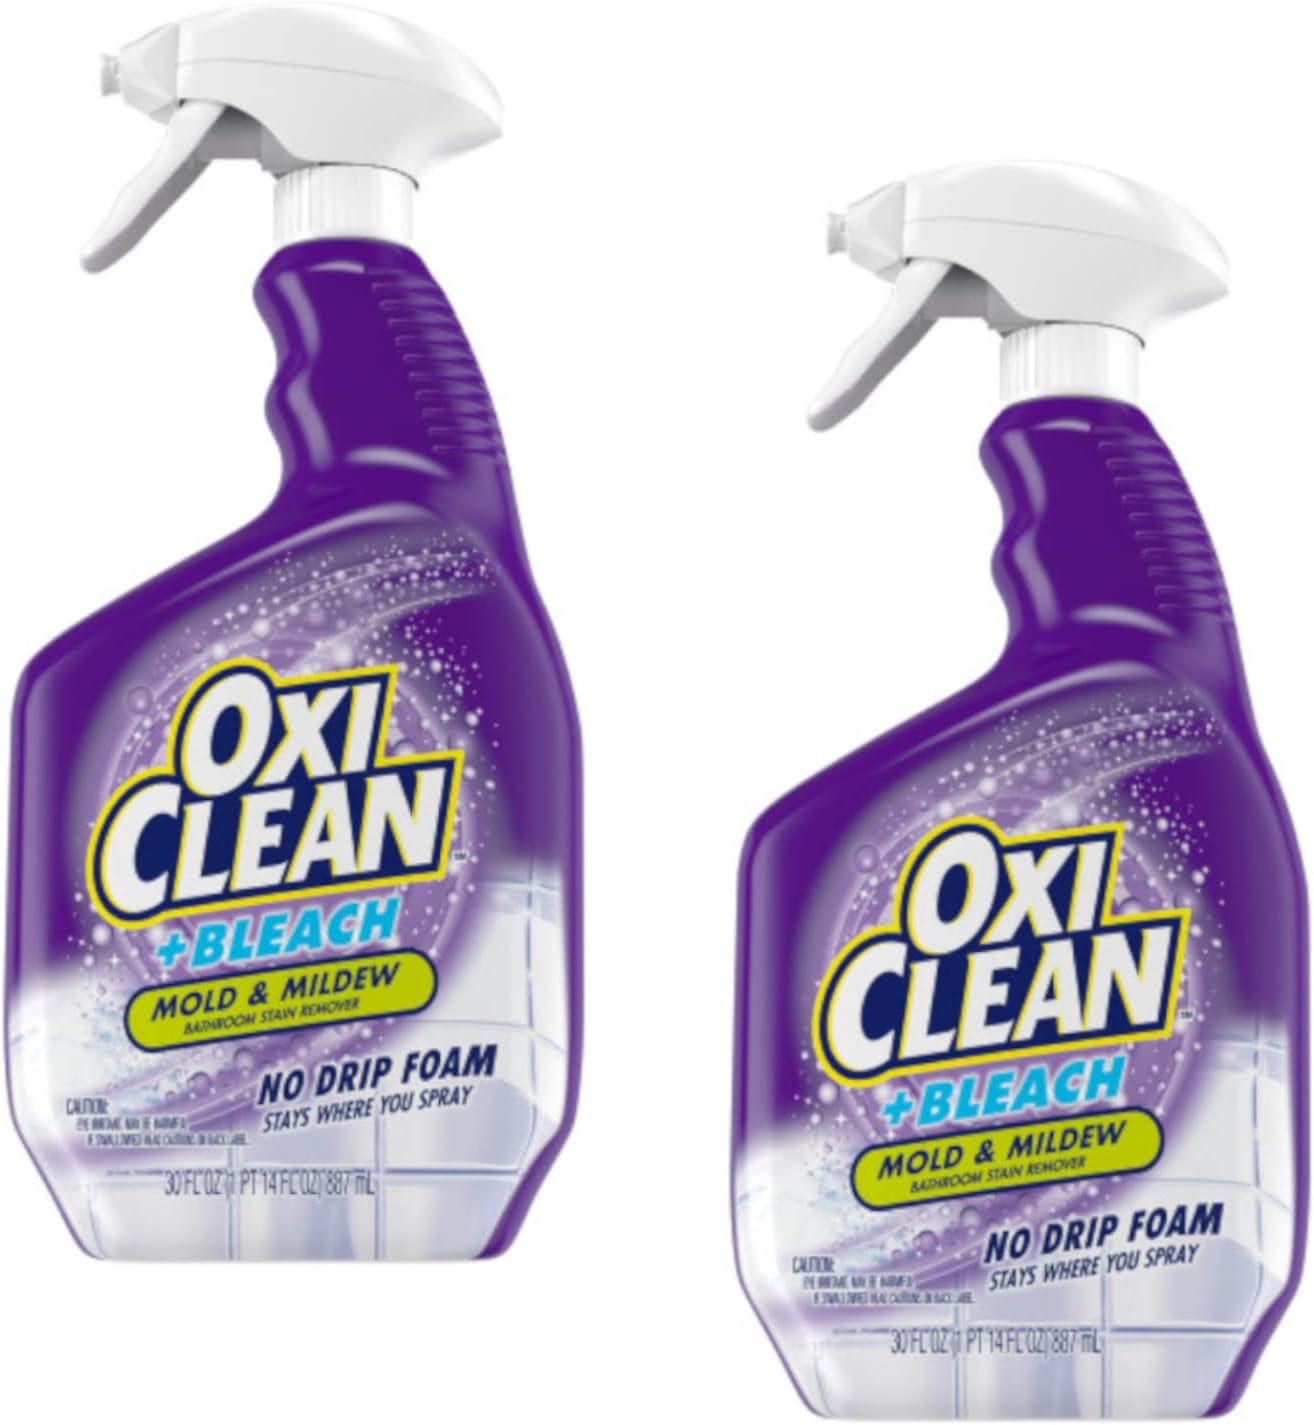 OxiClean plus Bleach, Bathroom Stain Remover 30 oz. (Pack of 2)